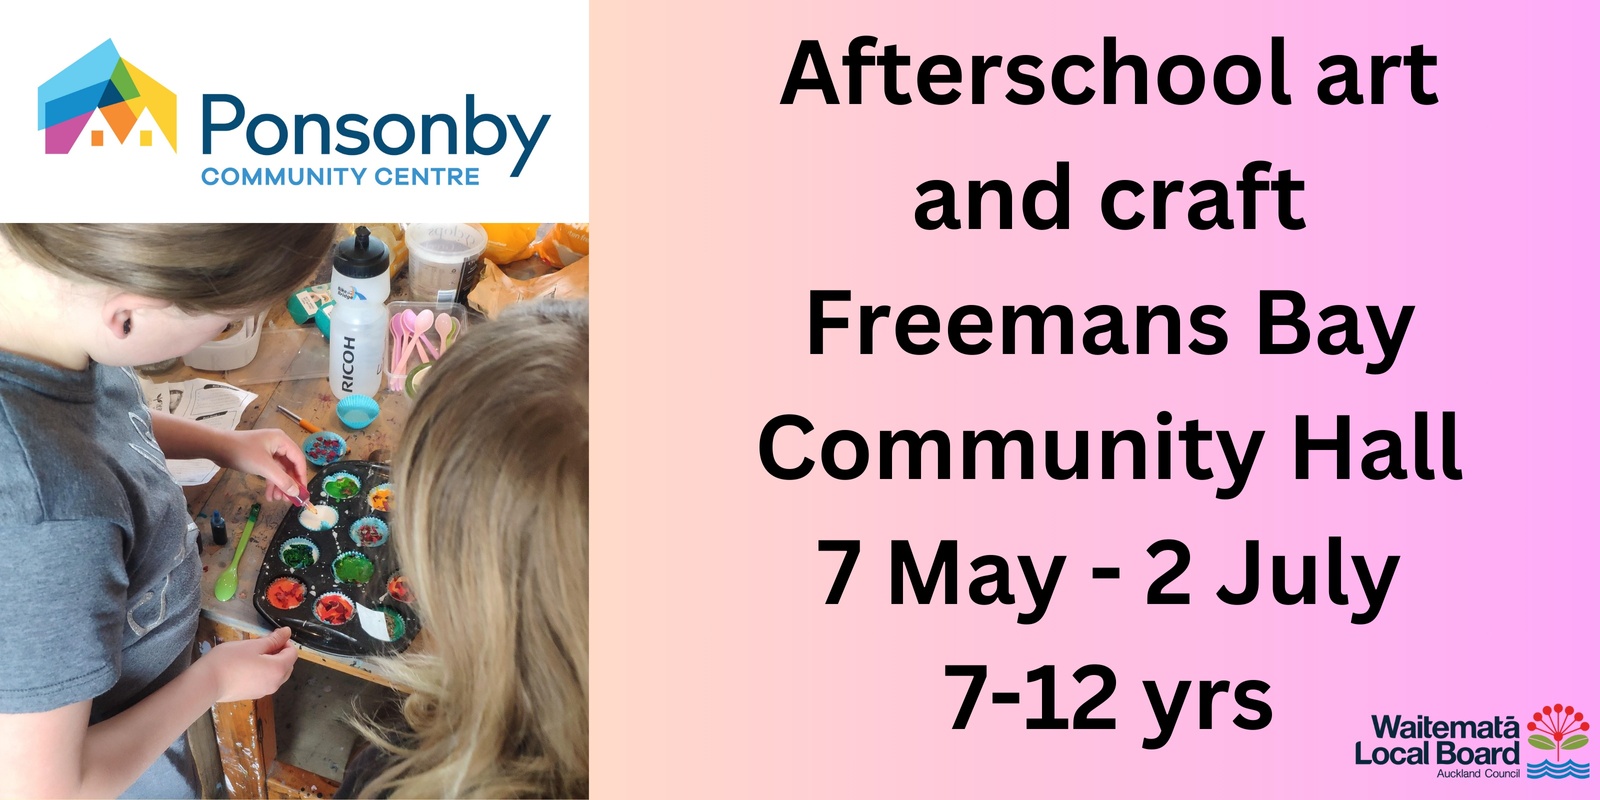 Banner image for After school art and craft classes